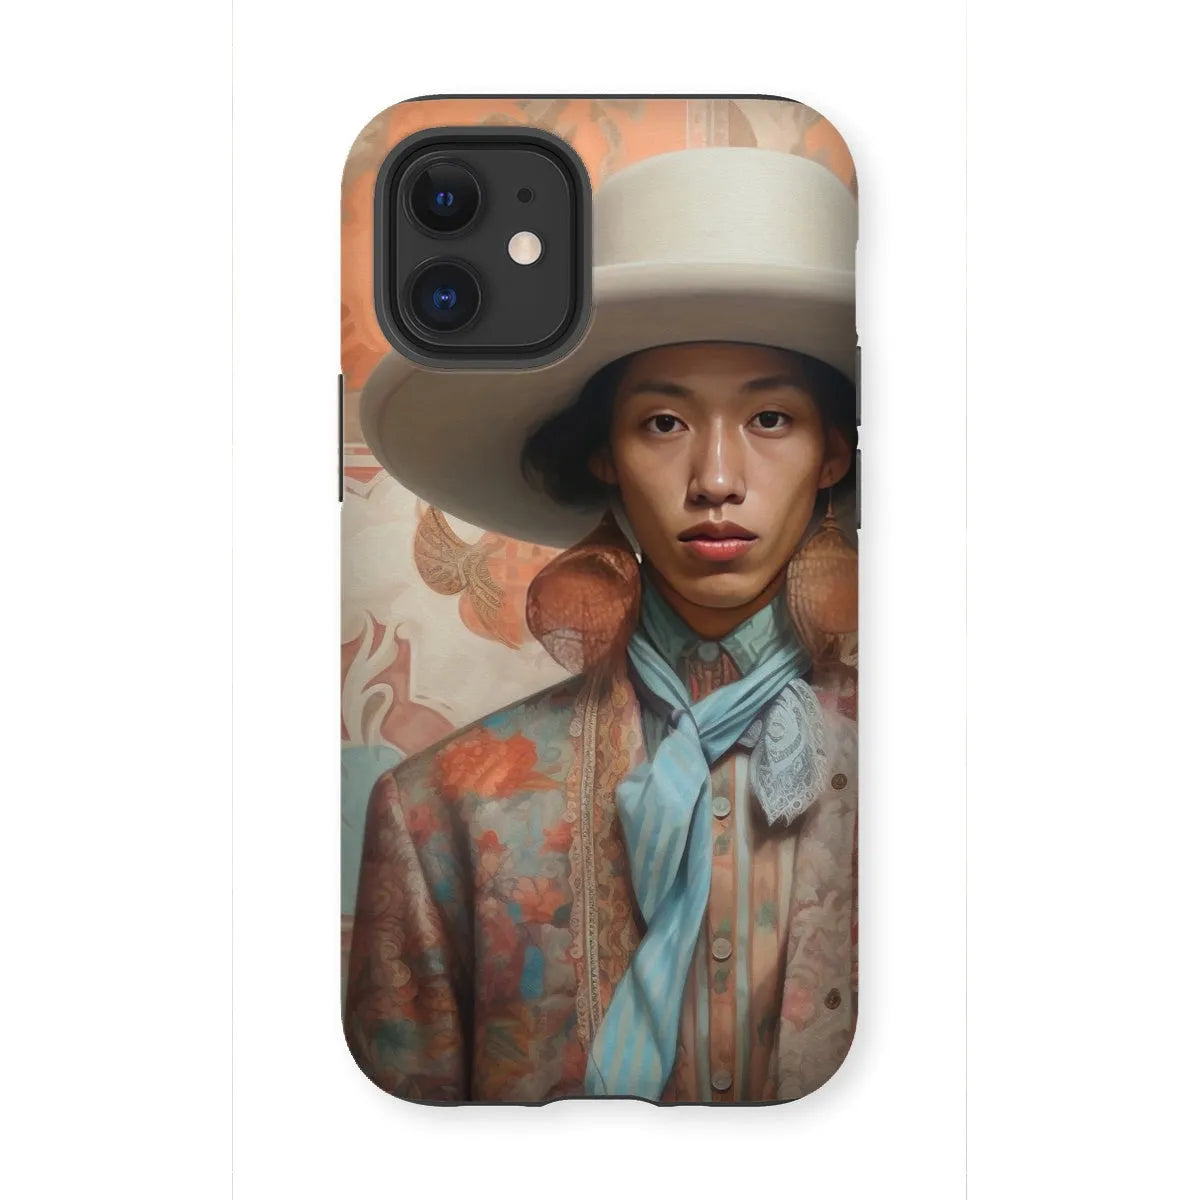 Iyaan - Gay Malay Asian Cowboy Aesthetic Art Phone Case - Iphone 12 Mini / Matte - Mobile Phone Cases - Aesthetic Art